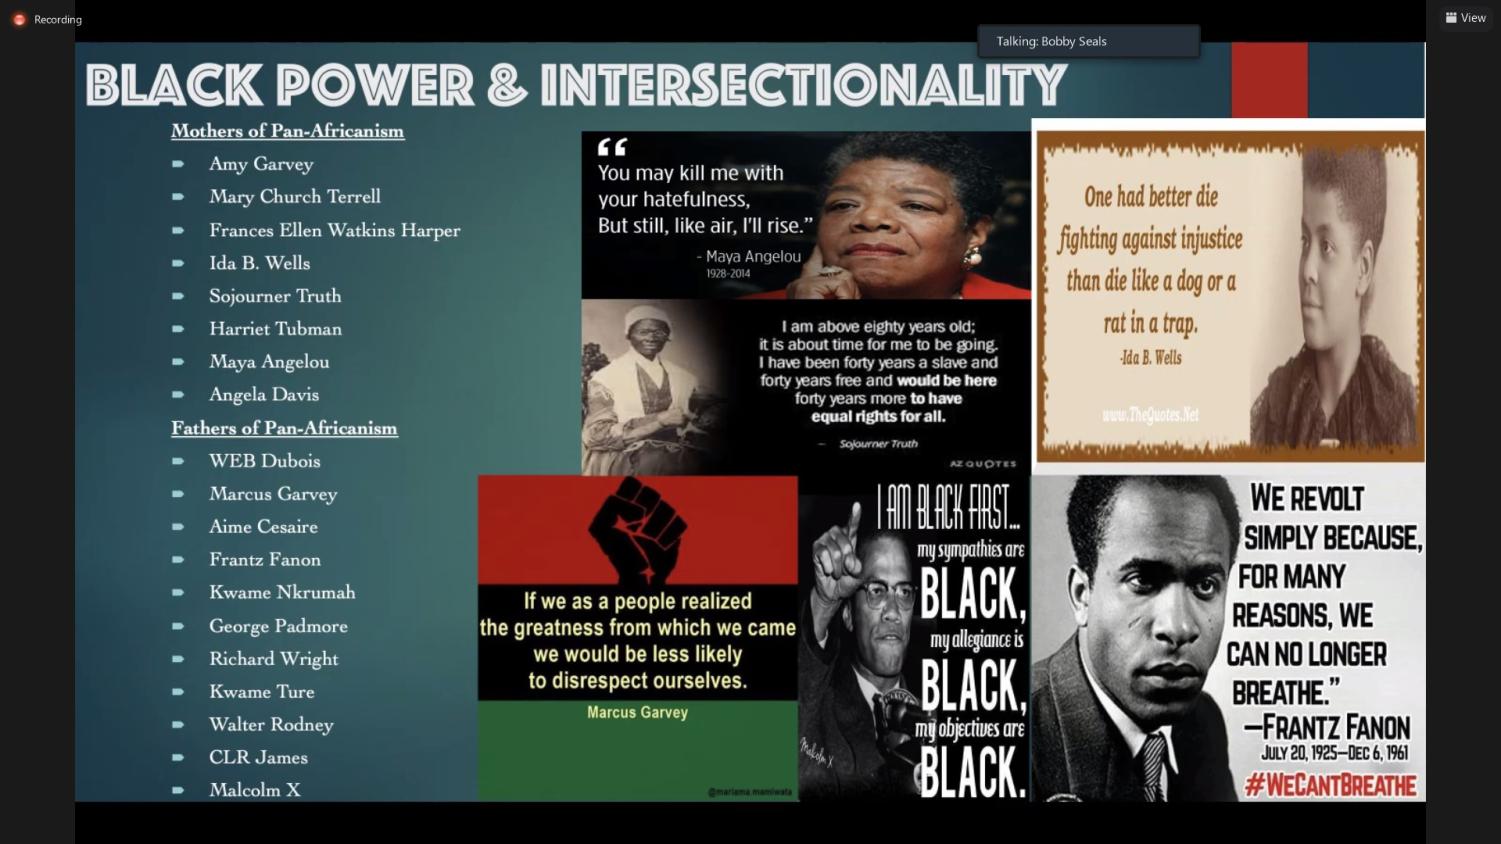 A screenshot from Moorpark College's Black History Month webinar on Feb. 2, 2022. The image depicts and lists figures that represent Black Power and Intersectionality.